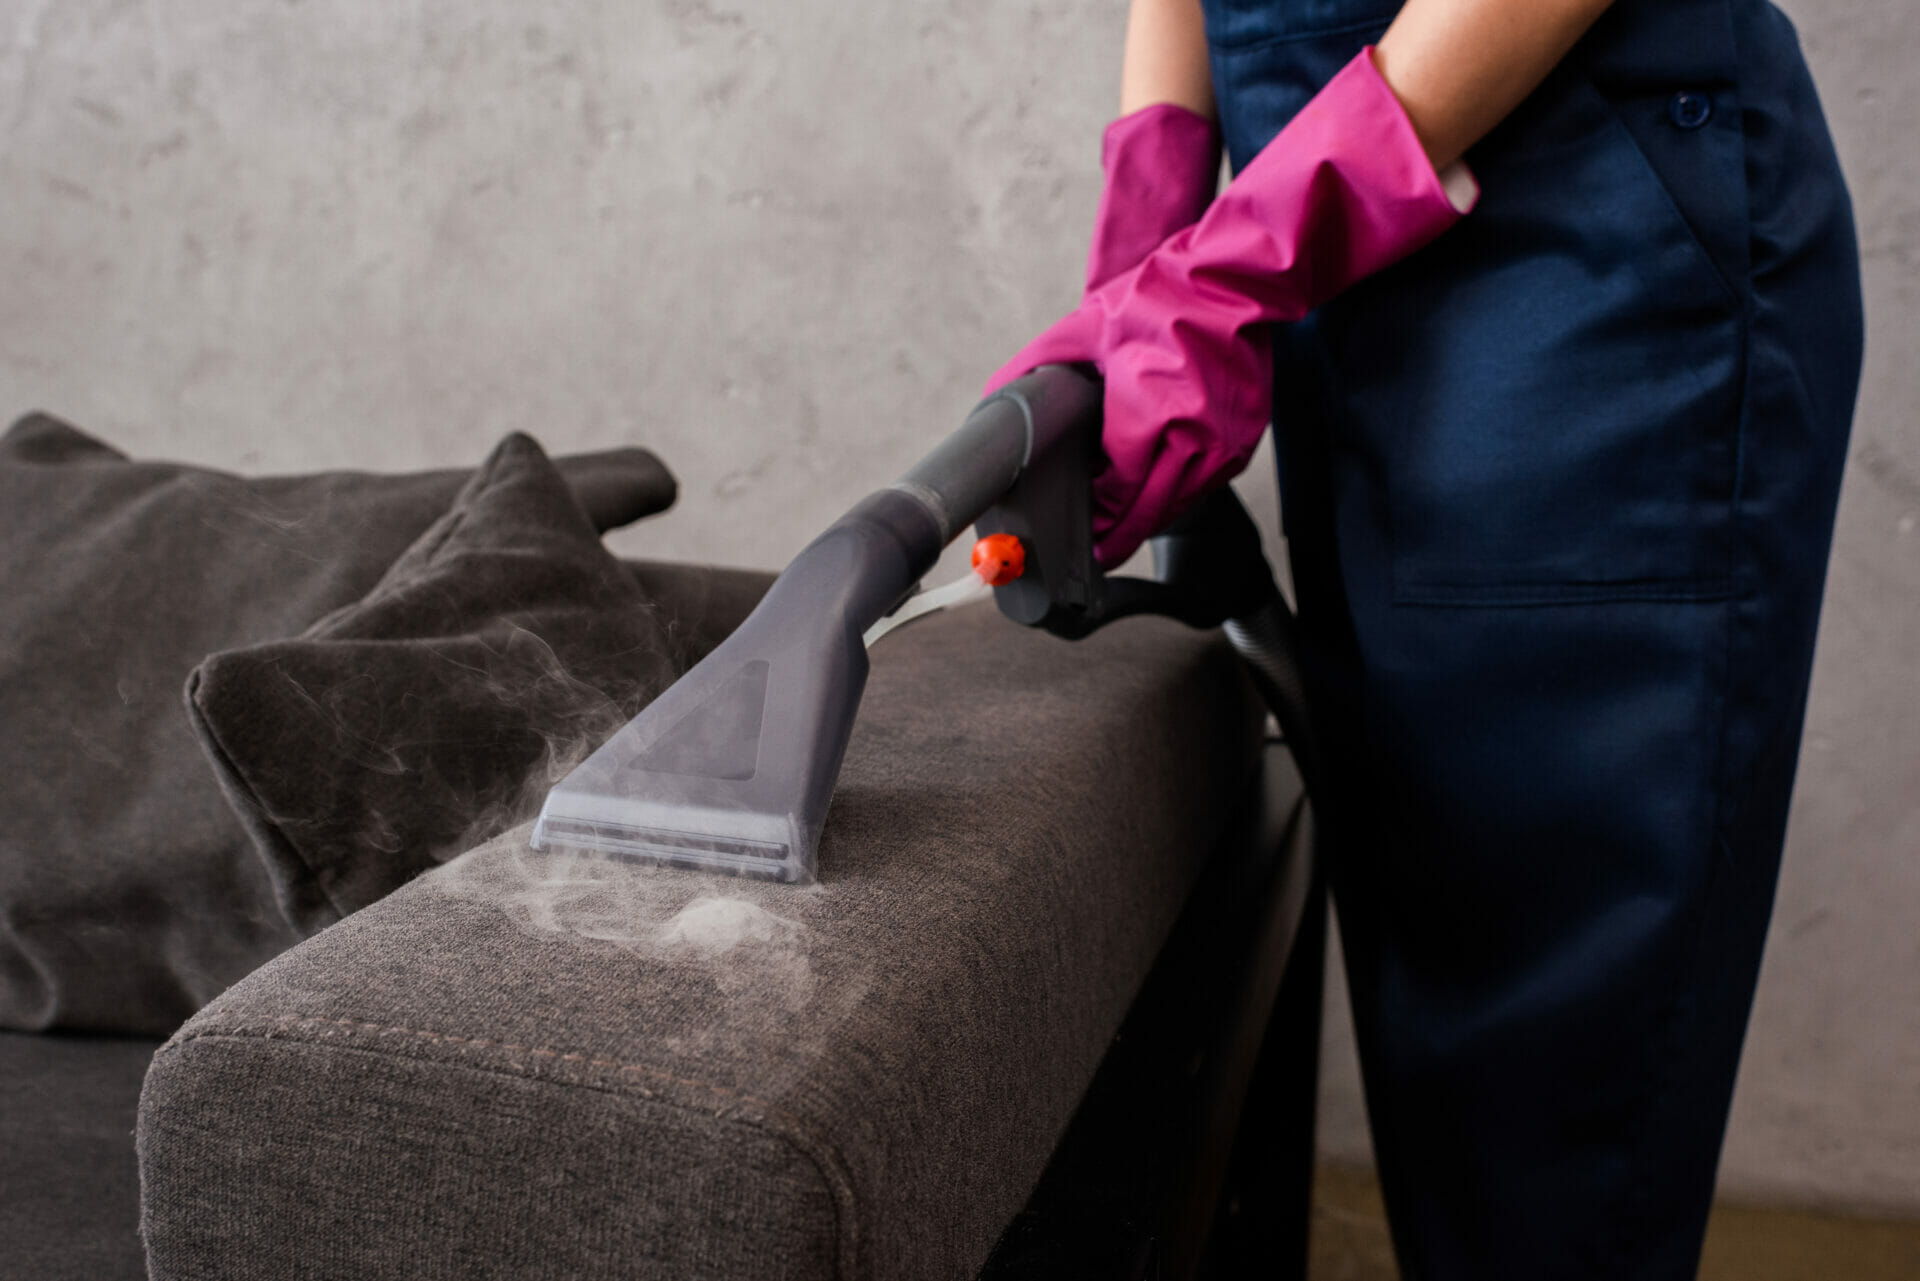 The Best Way to Steam Clean Your Couch